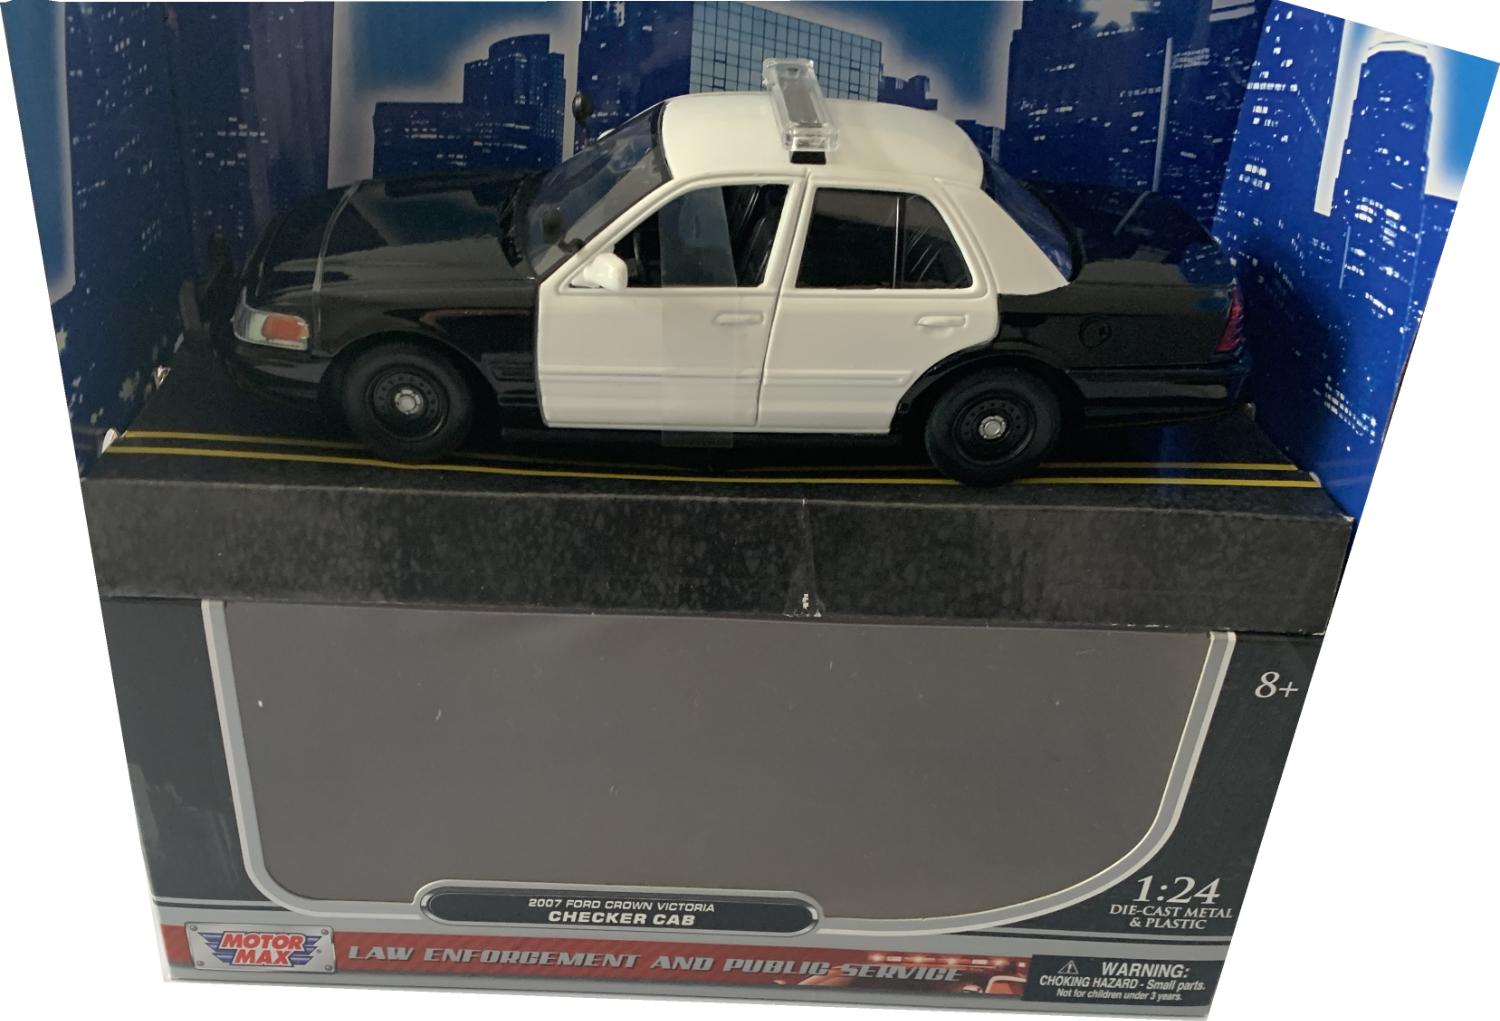 Police Interceptor.  A good production of the Ford Crown Victoria with detail throughout, all authentically recreated.  The model is presented in a window display box, the car is approx. 22.5 cm long and the presentation box is 26.5 cm long